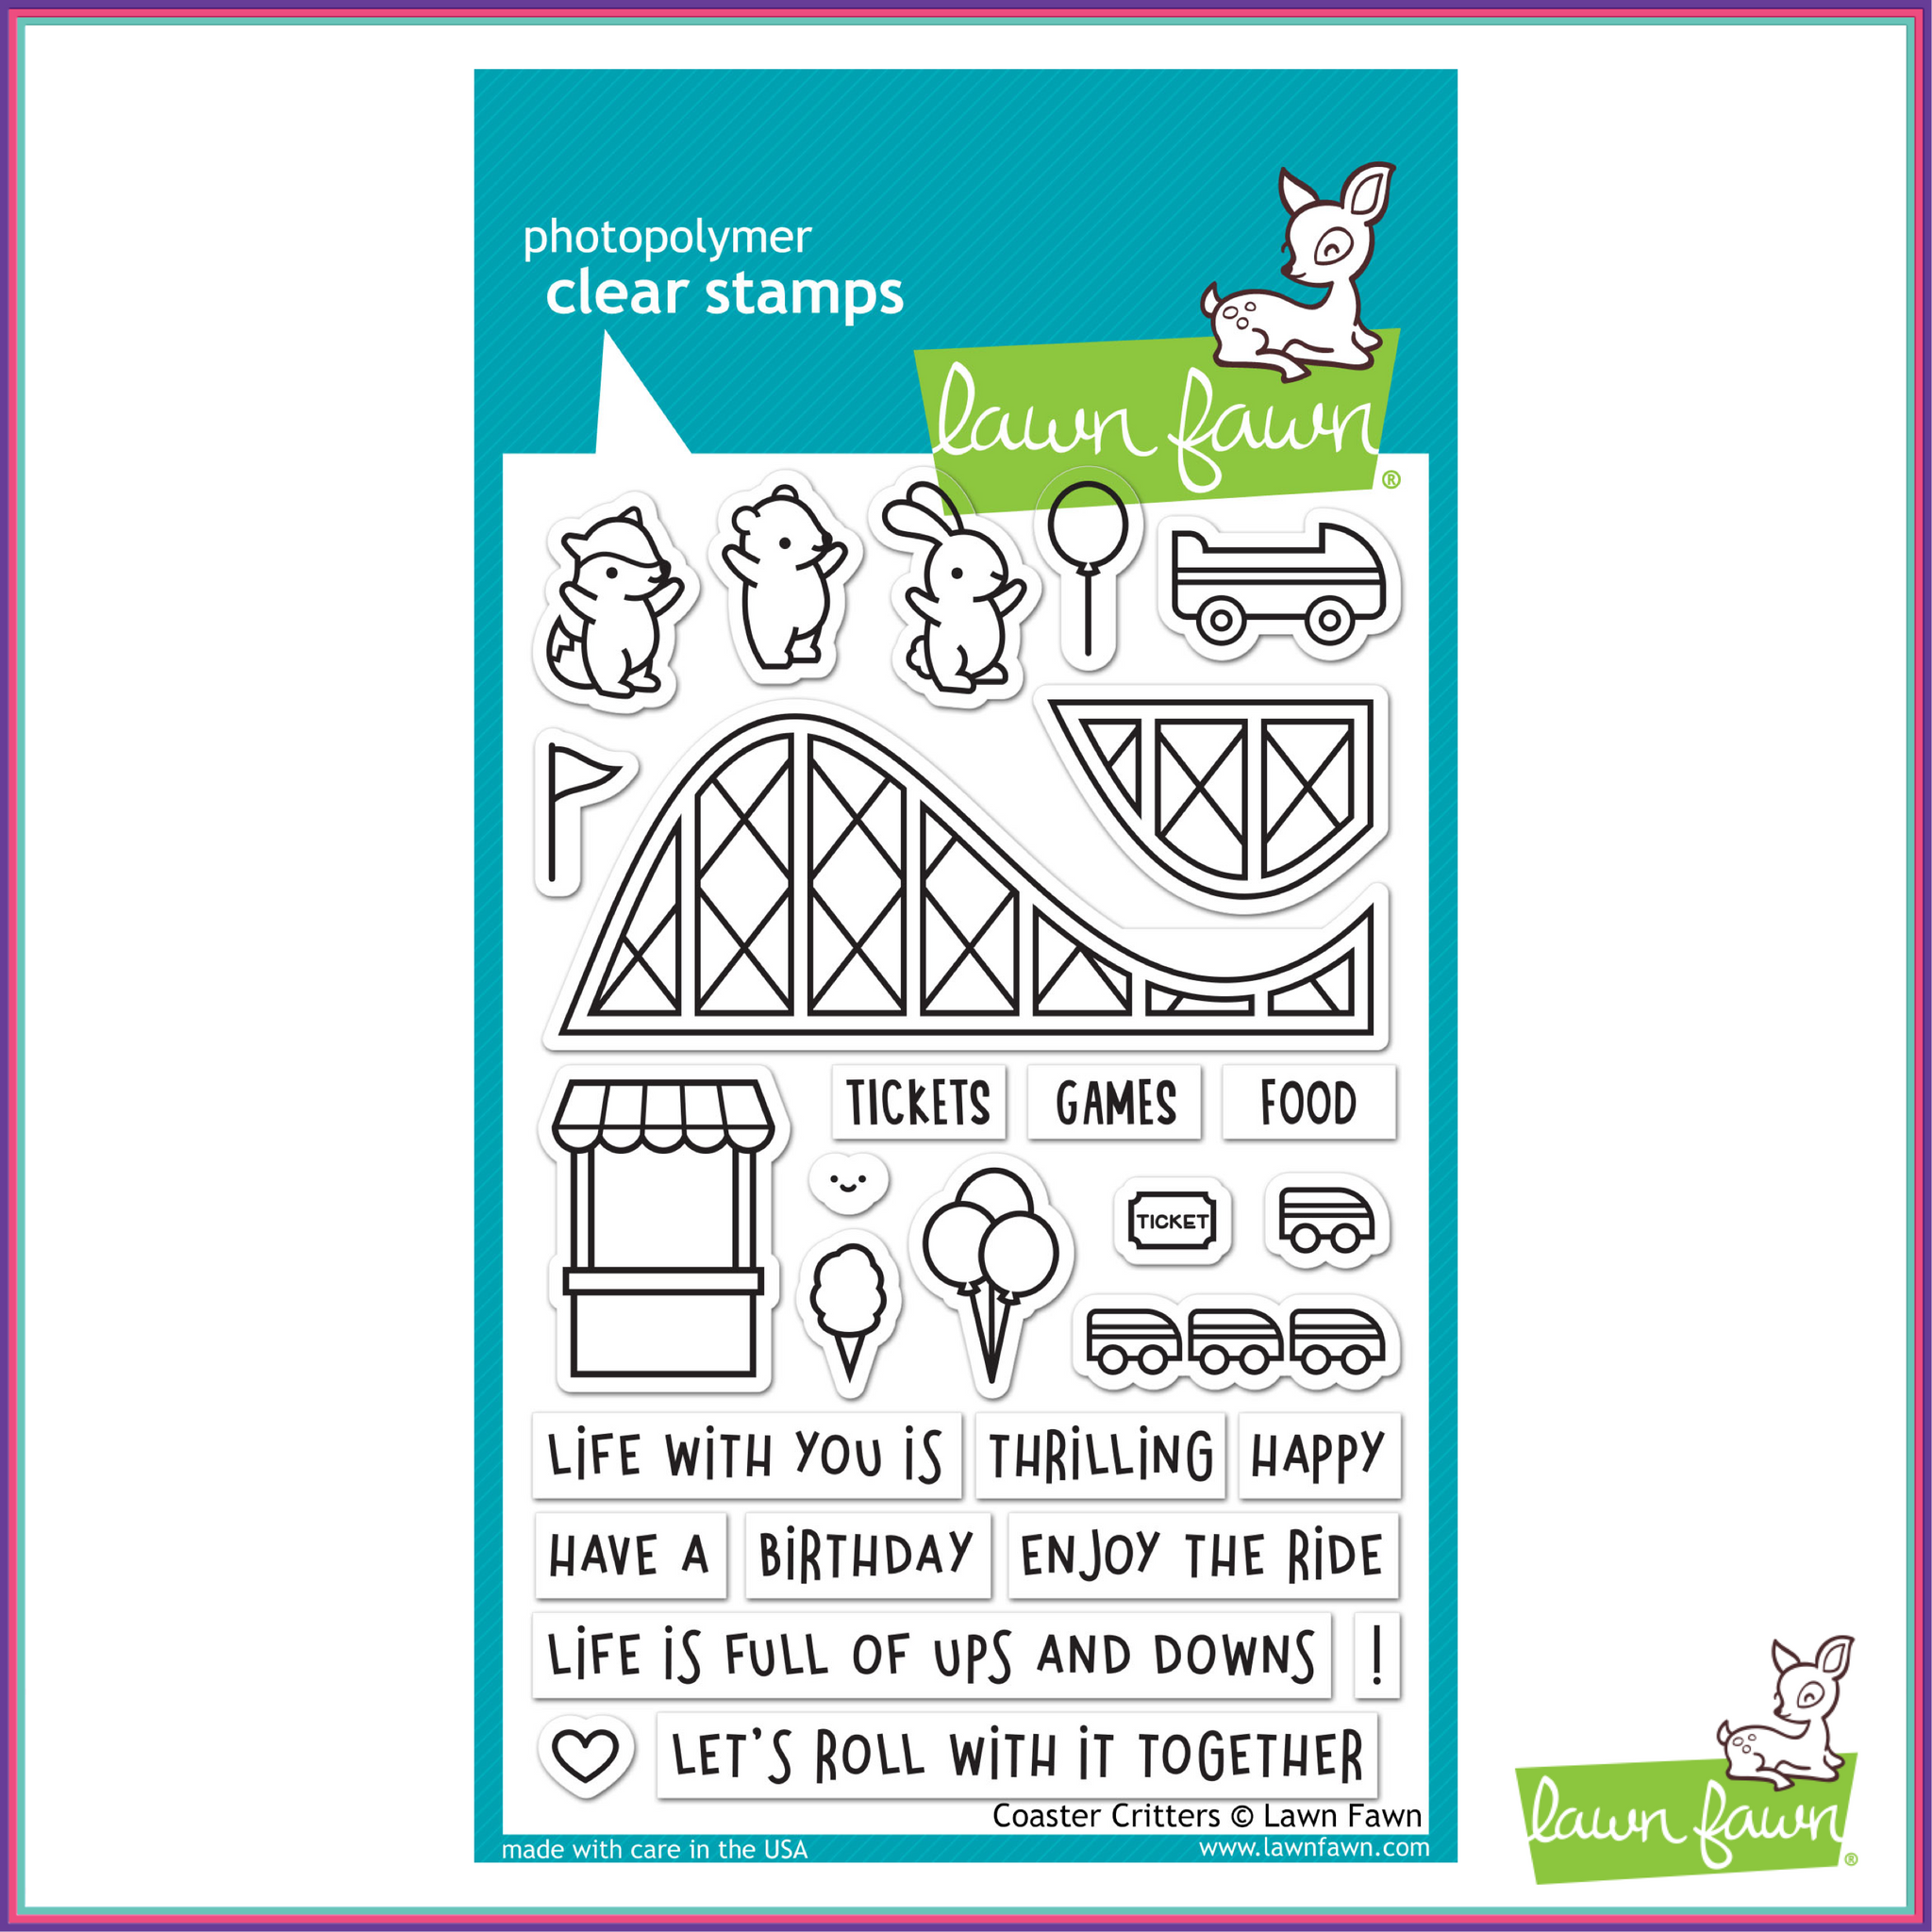 Lawn Fawn Coaster Critters Stamp Set - Stamps - Lawn Fawn - Orchids and Hummingbirds Designs, LLC